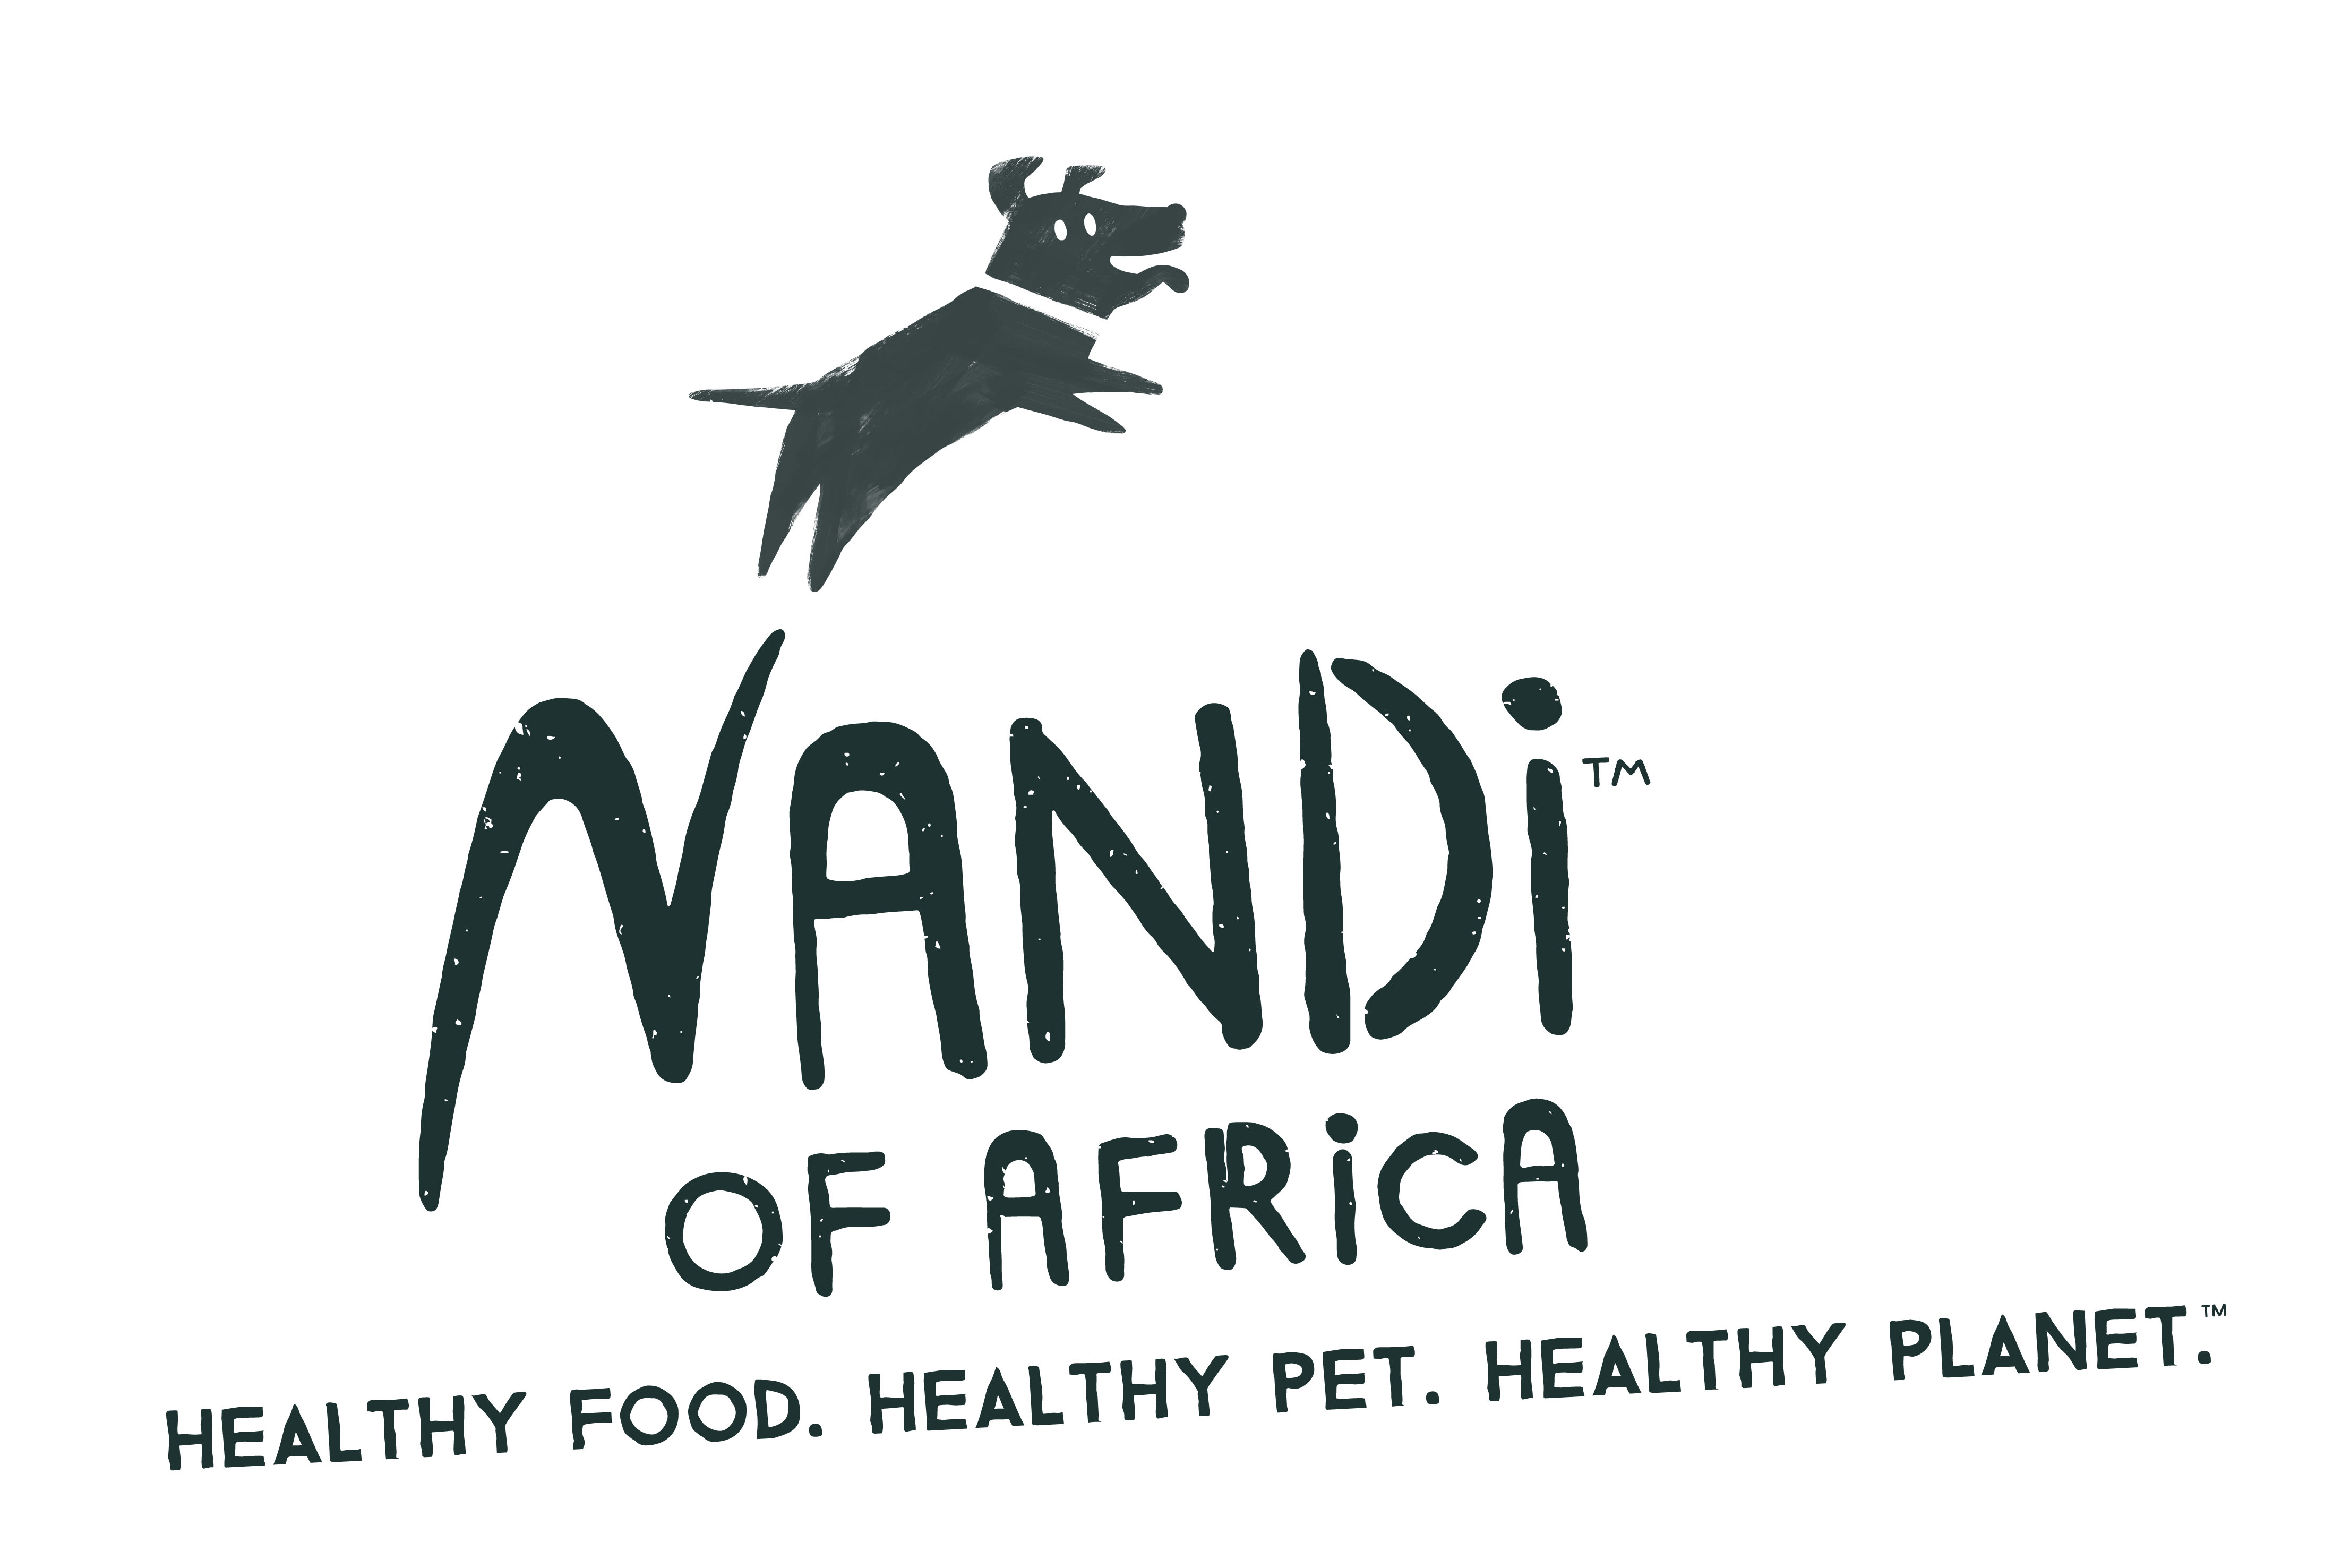 Nandi_Dog_Full logo_Of Africa with payoff line